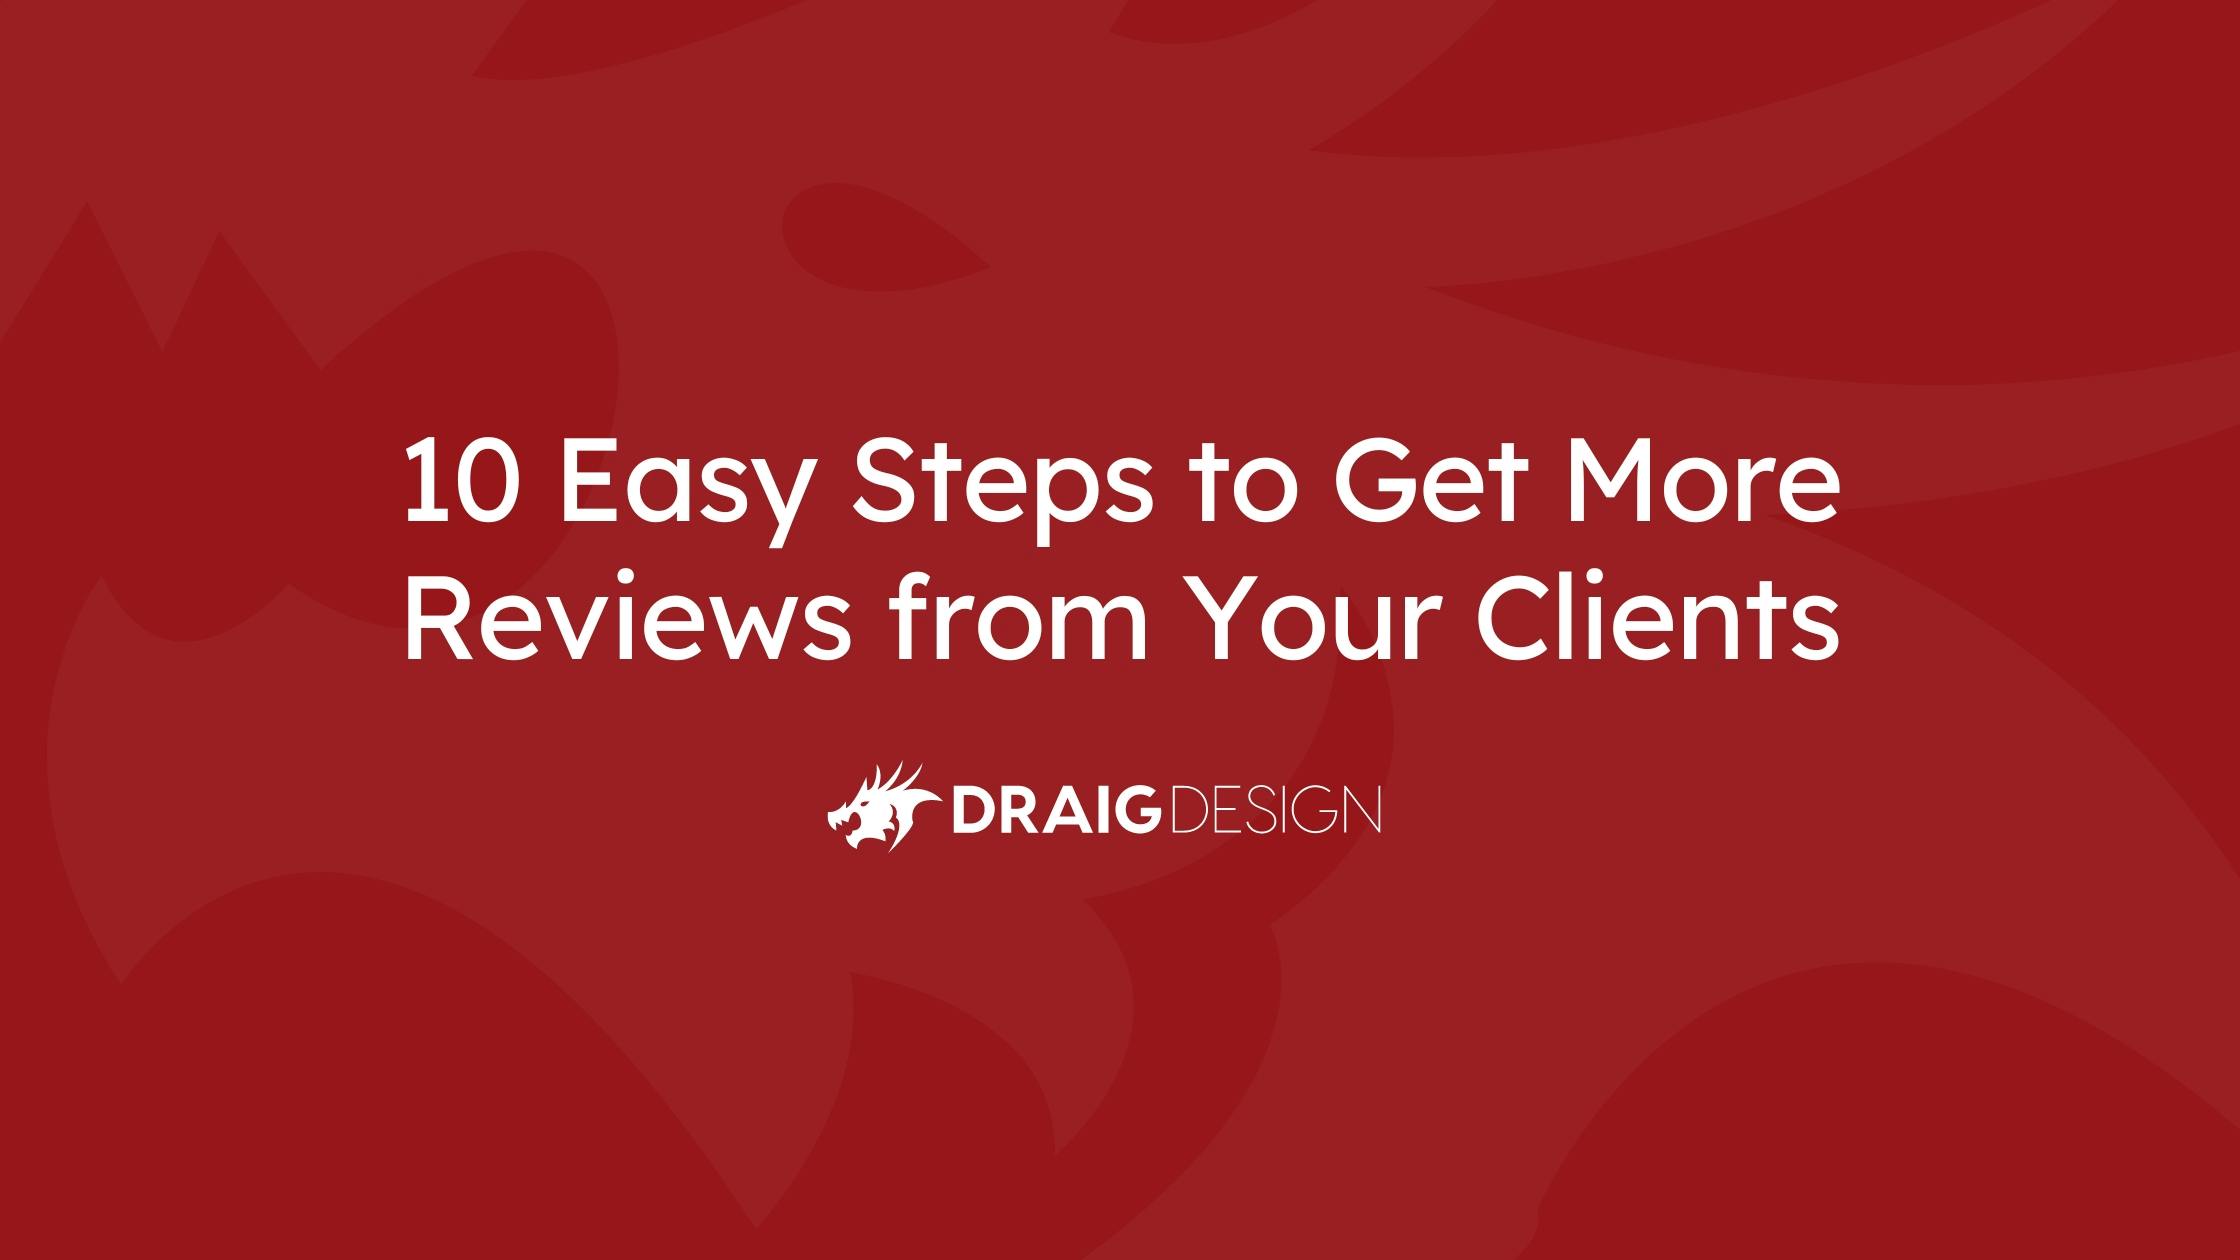 10 Easy Steps to Get More Reviews from Your Clients